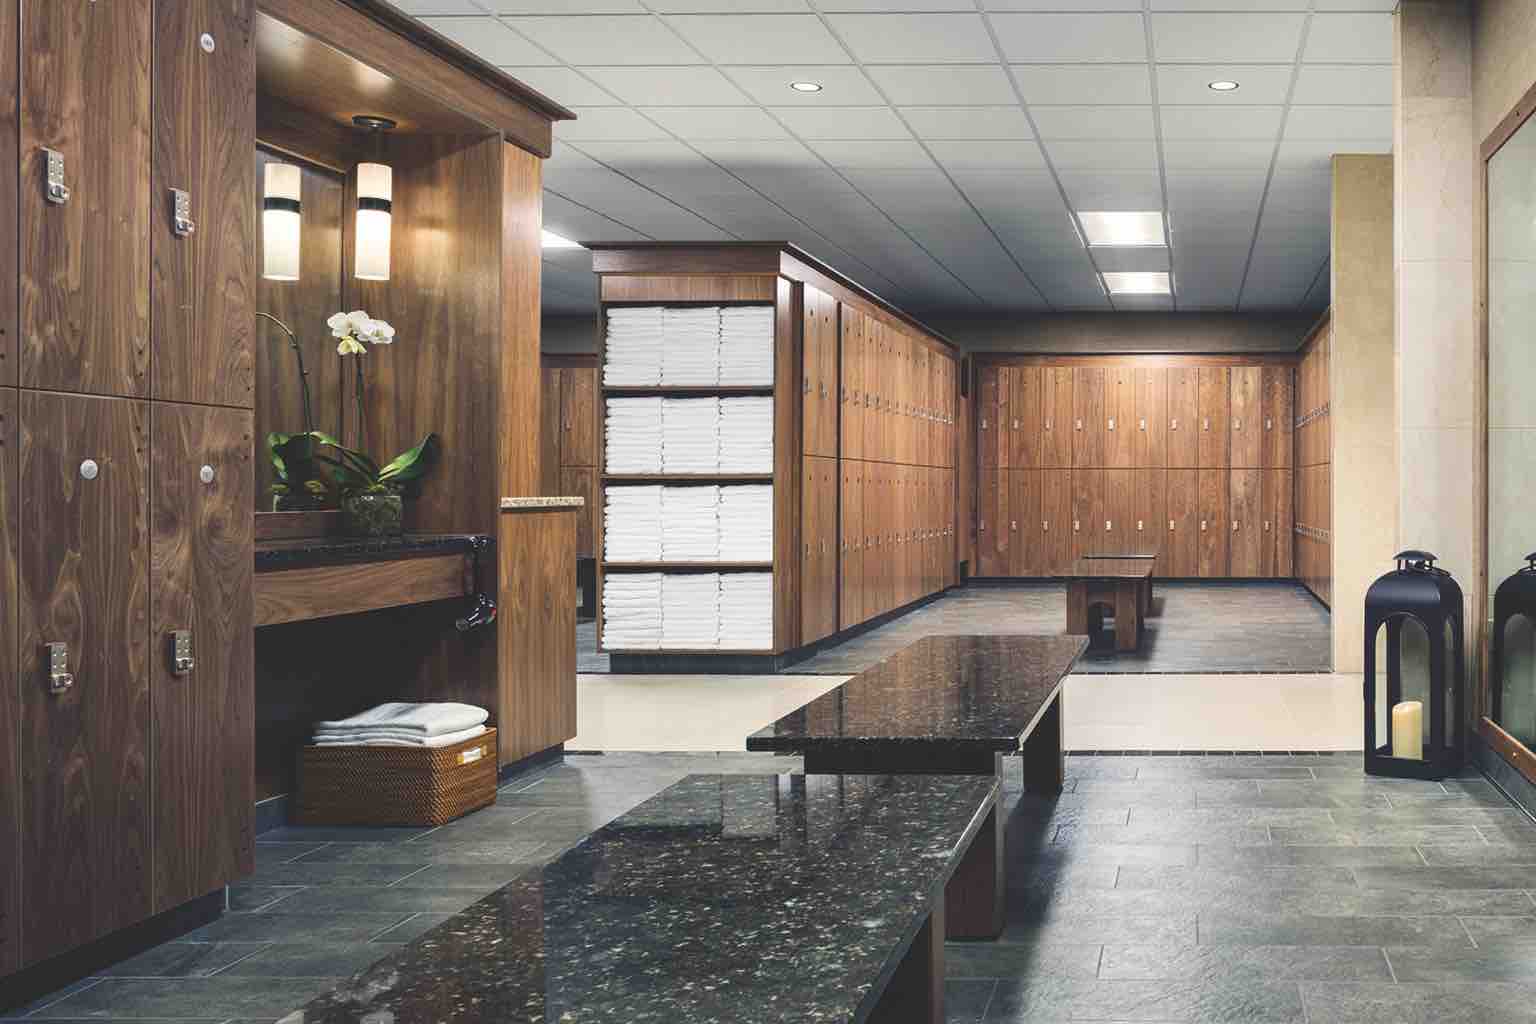 A luxurious locker room with rows of wooden lockers, a vanity area, benches and open shelving with stacks of white towels